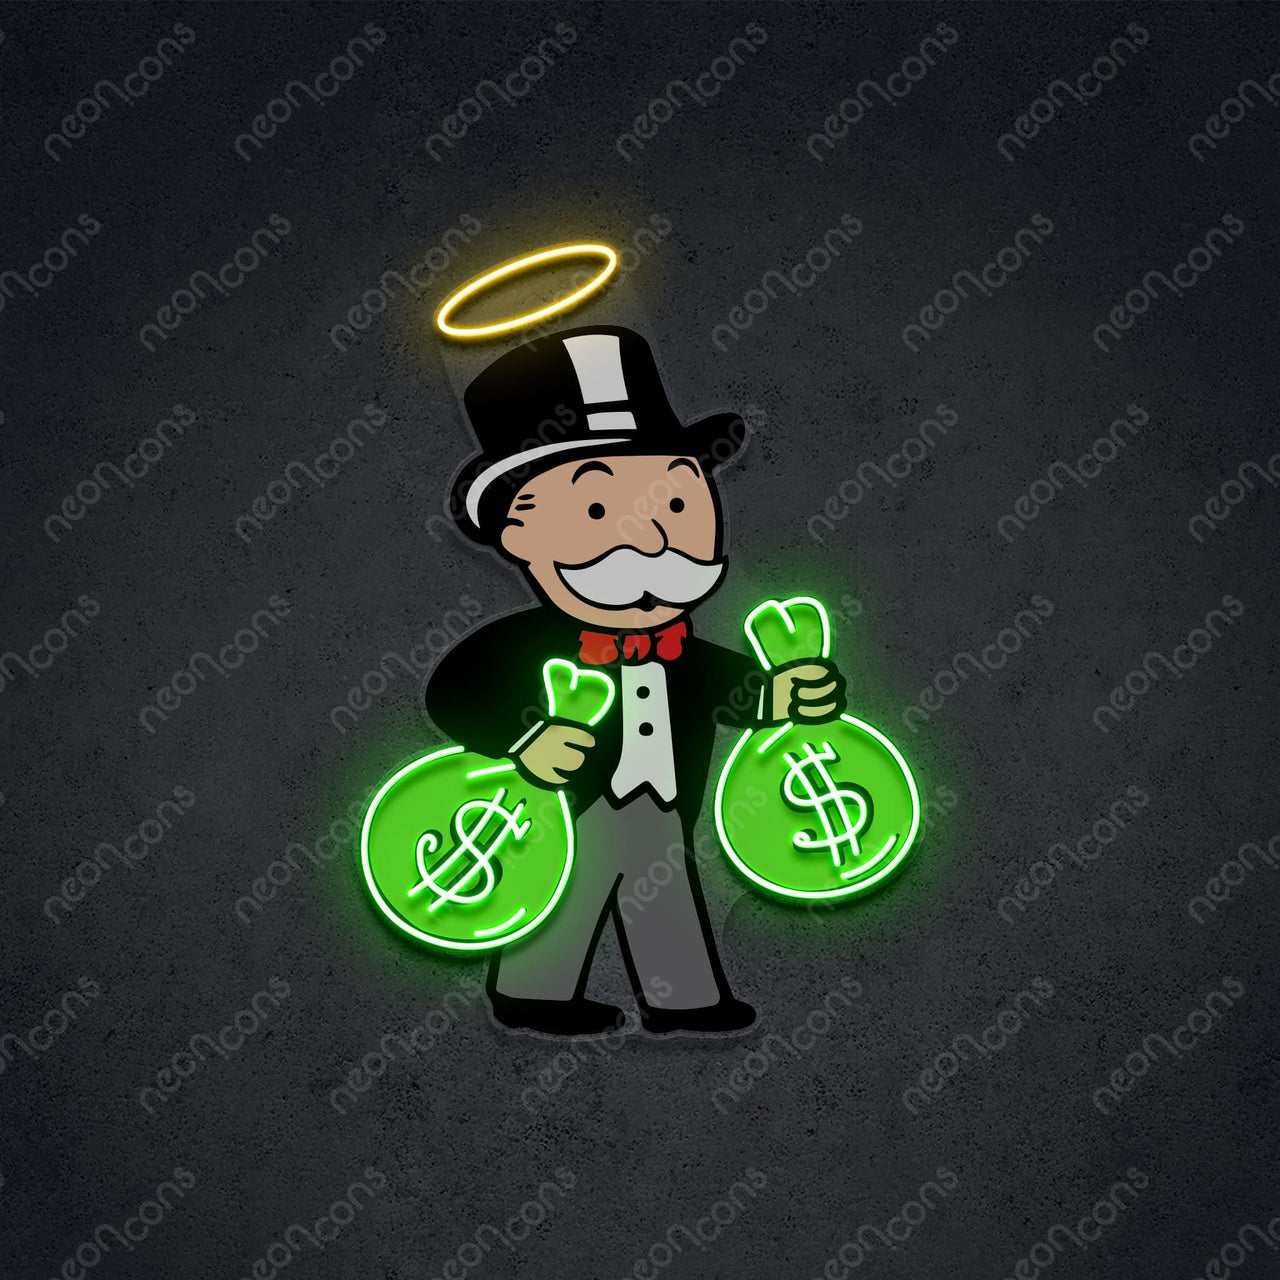 "Advance to Go, Collect $200" LED Neon x Acrylic Artwork by Neon Icons